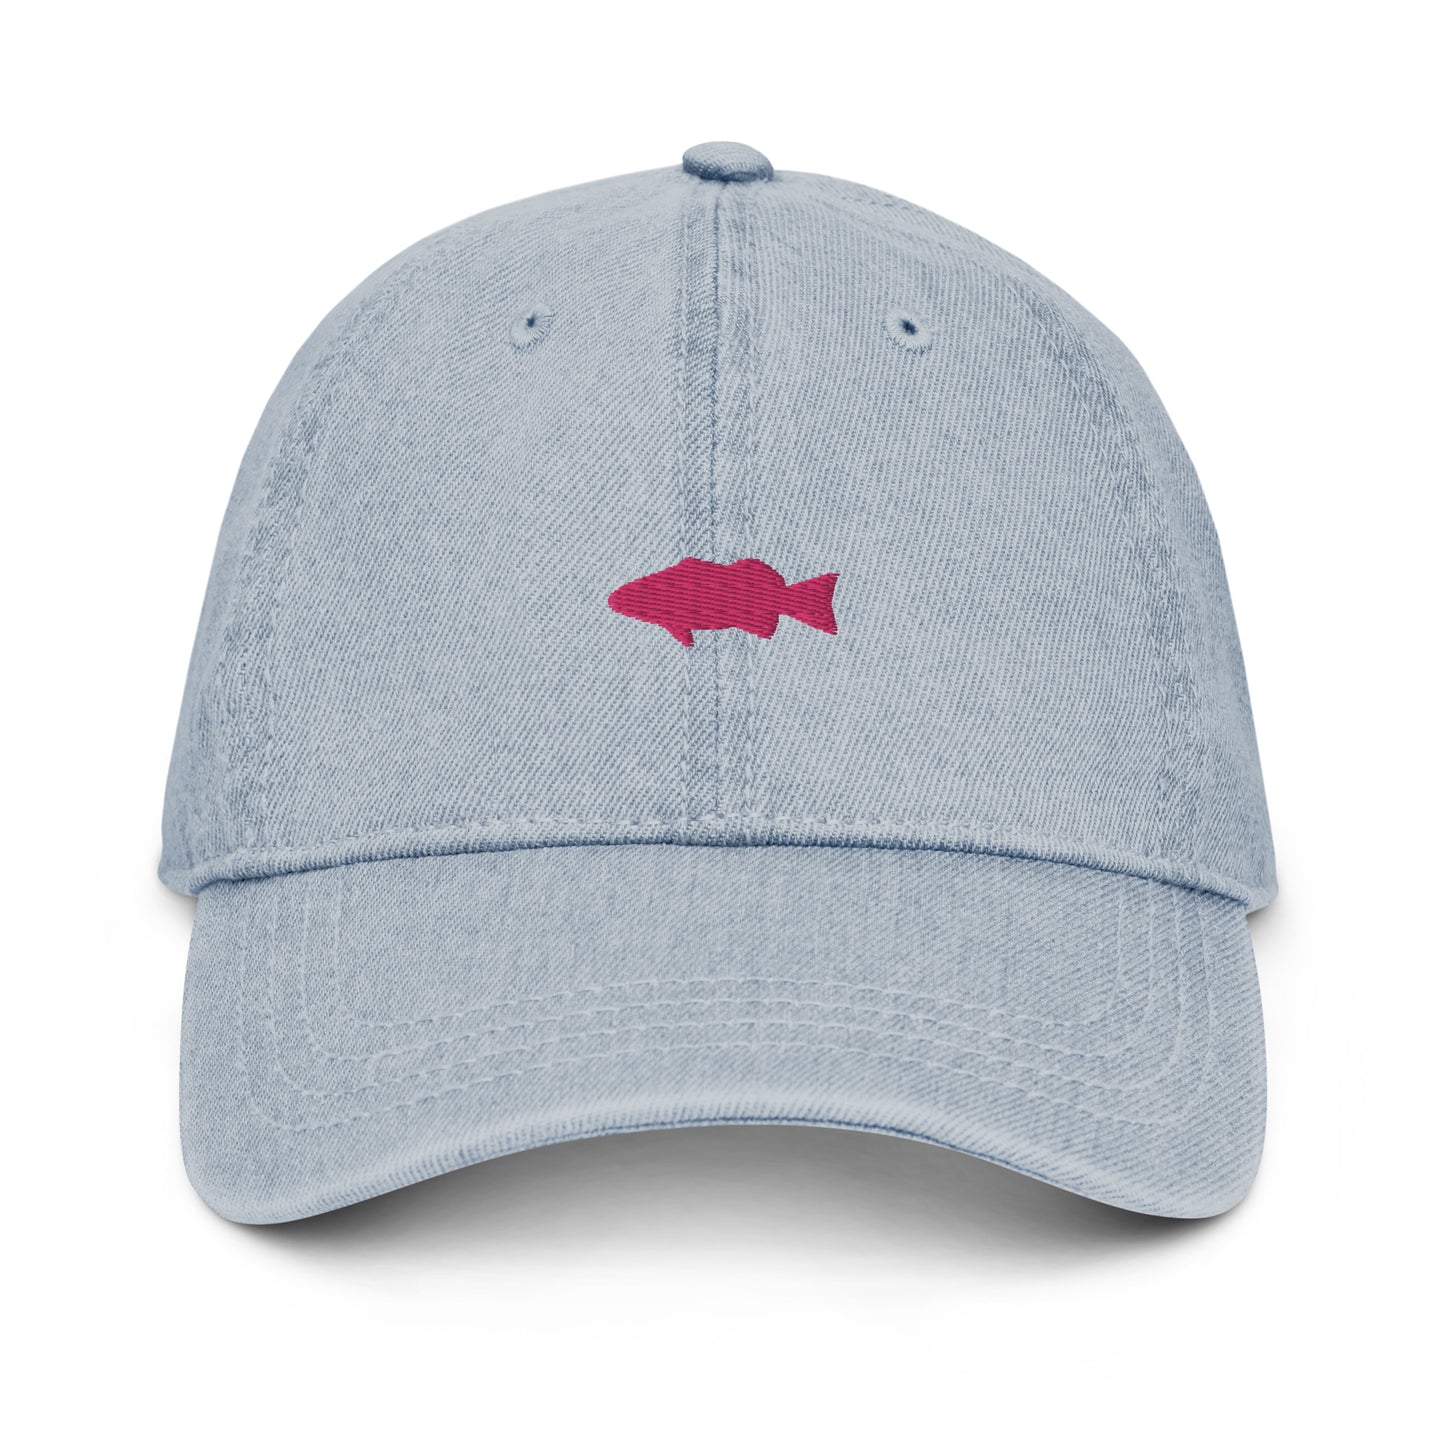 Coral Trout Custom Hat